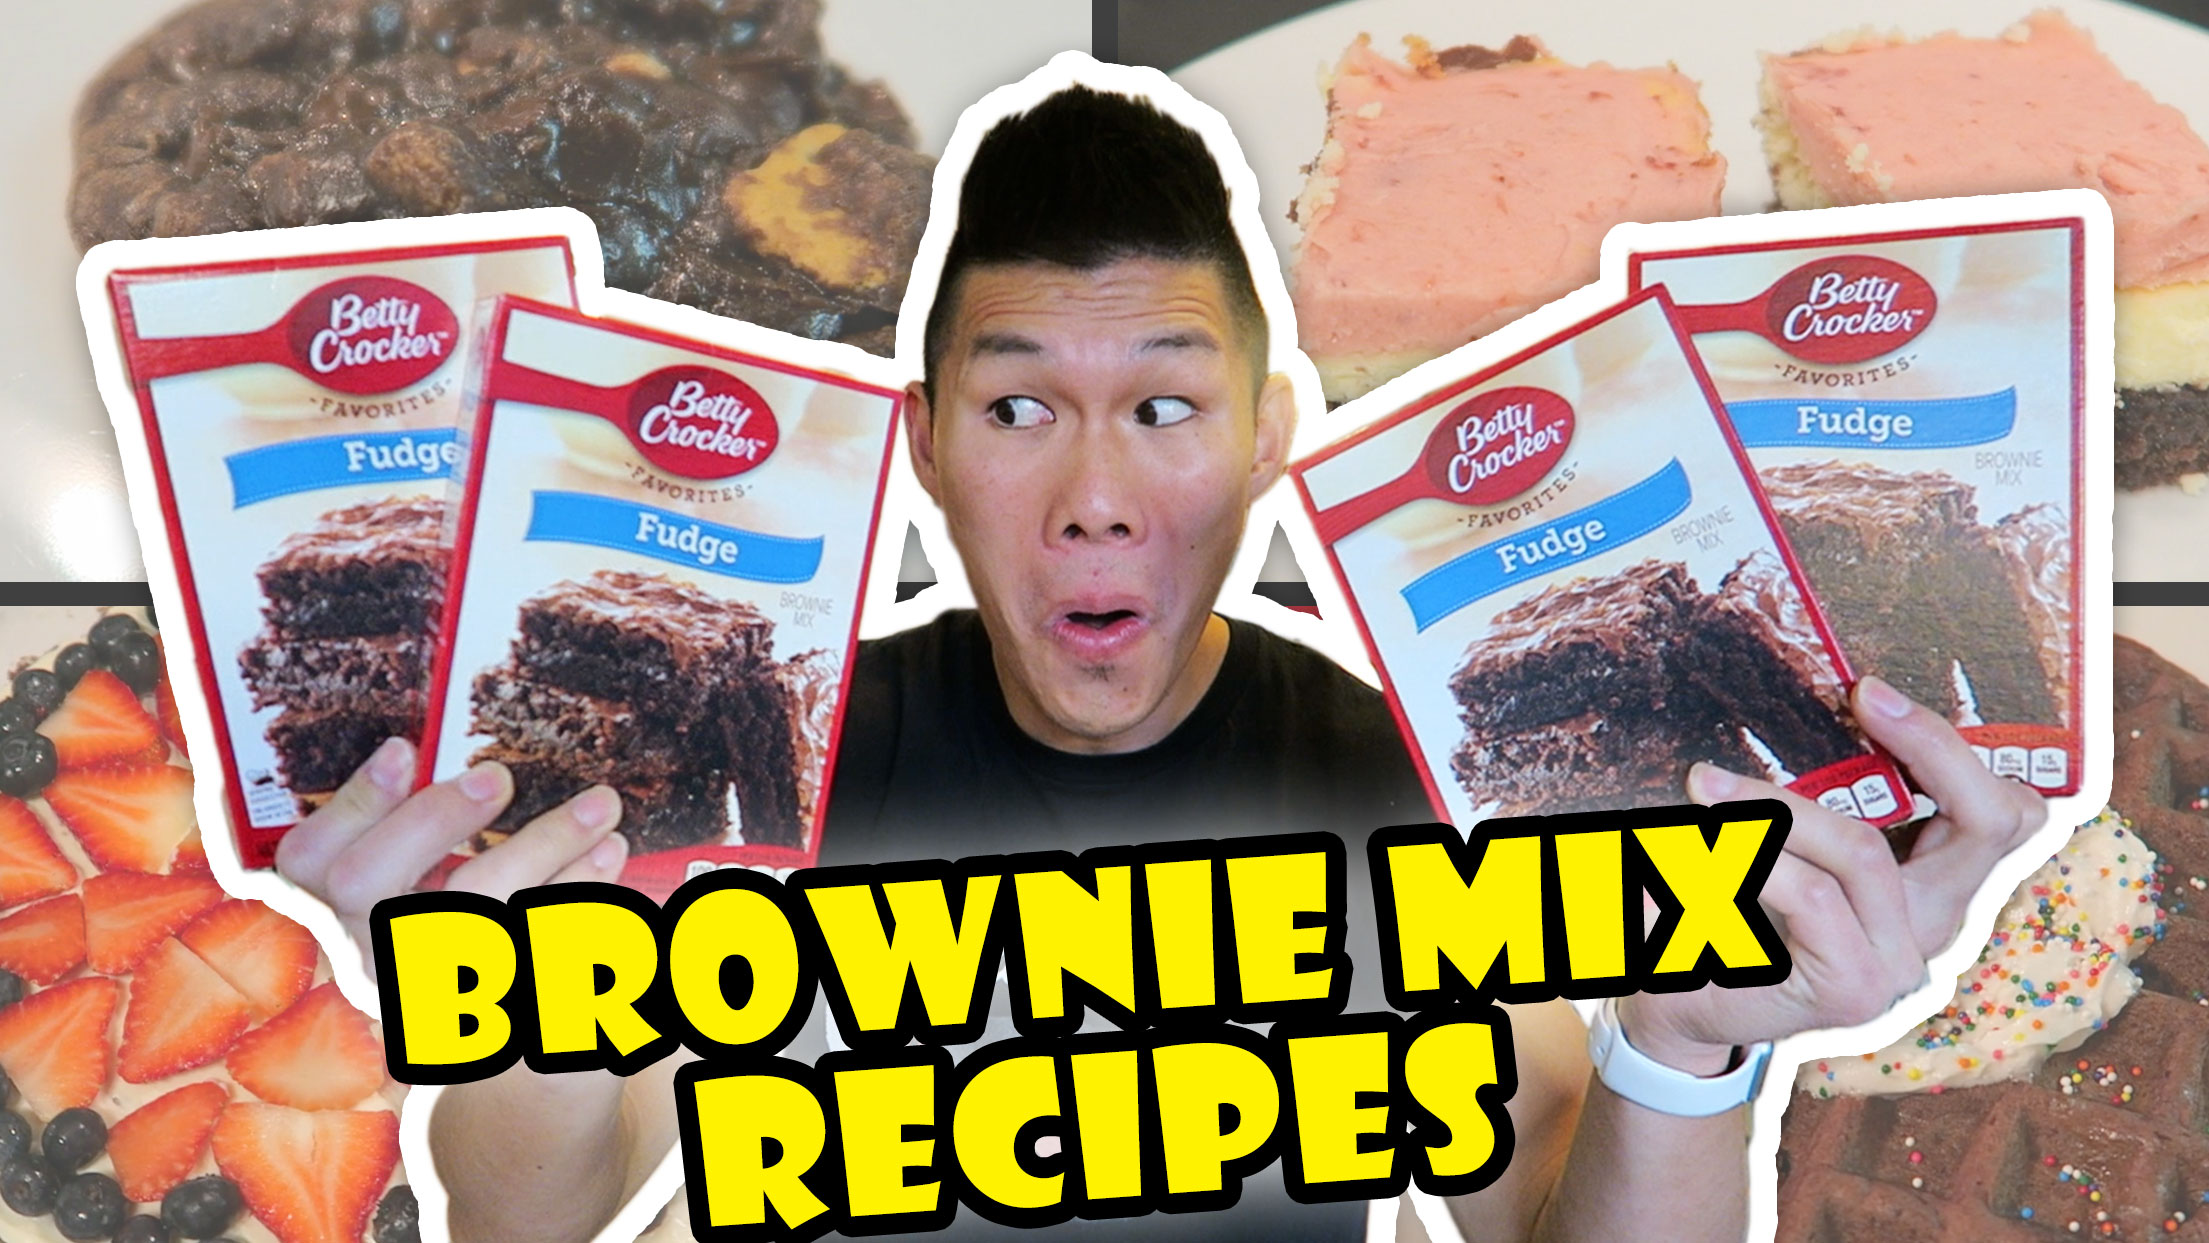 WHAT CAN YOU MAKE WITH BROWNIE MIX?